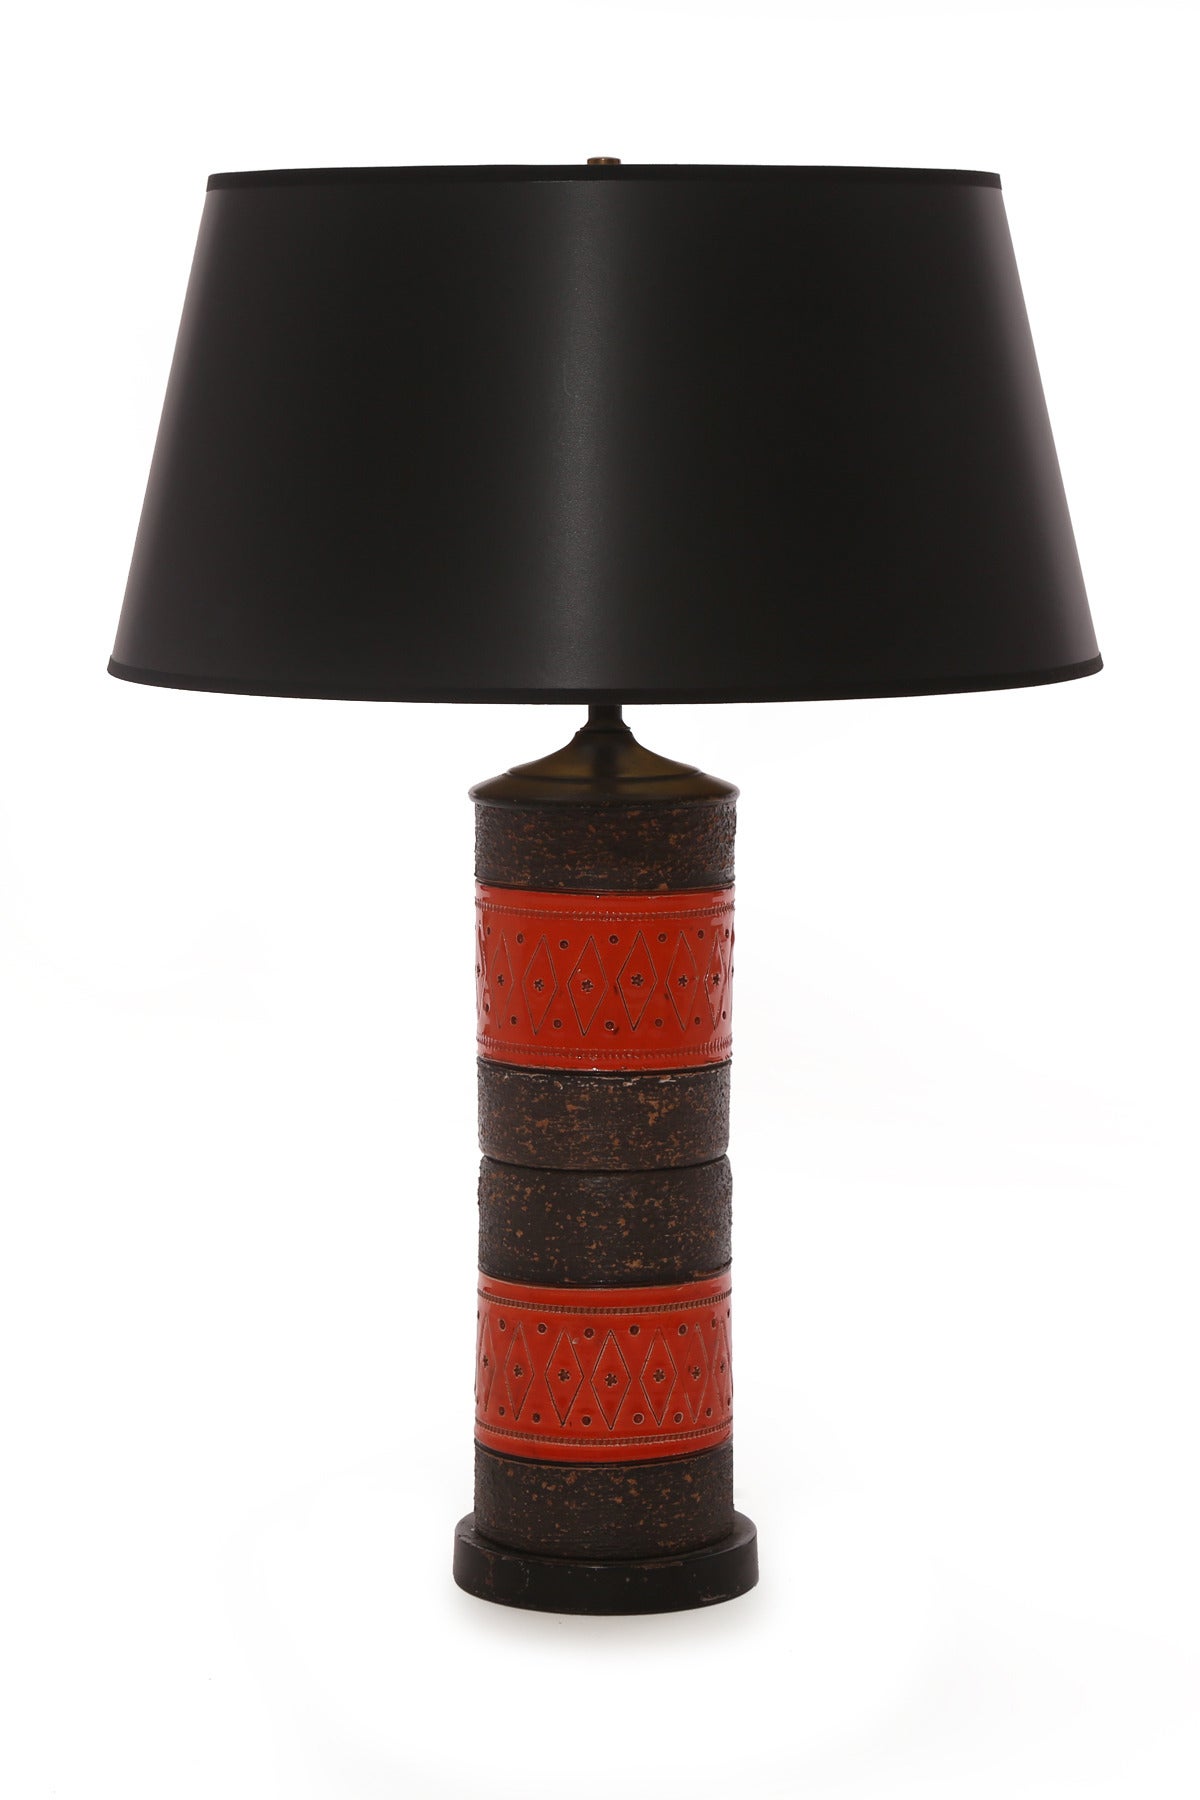 Fabulous pair of ceramic and enameled metal table lamps from Italy, circa early 1960s. These wonderful examples have earth tone ceramic bodies with volcanic glazing with persimmon enameled metal accents. Price listed is for the pair with shades.